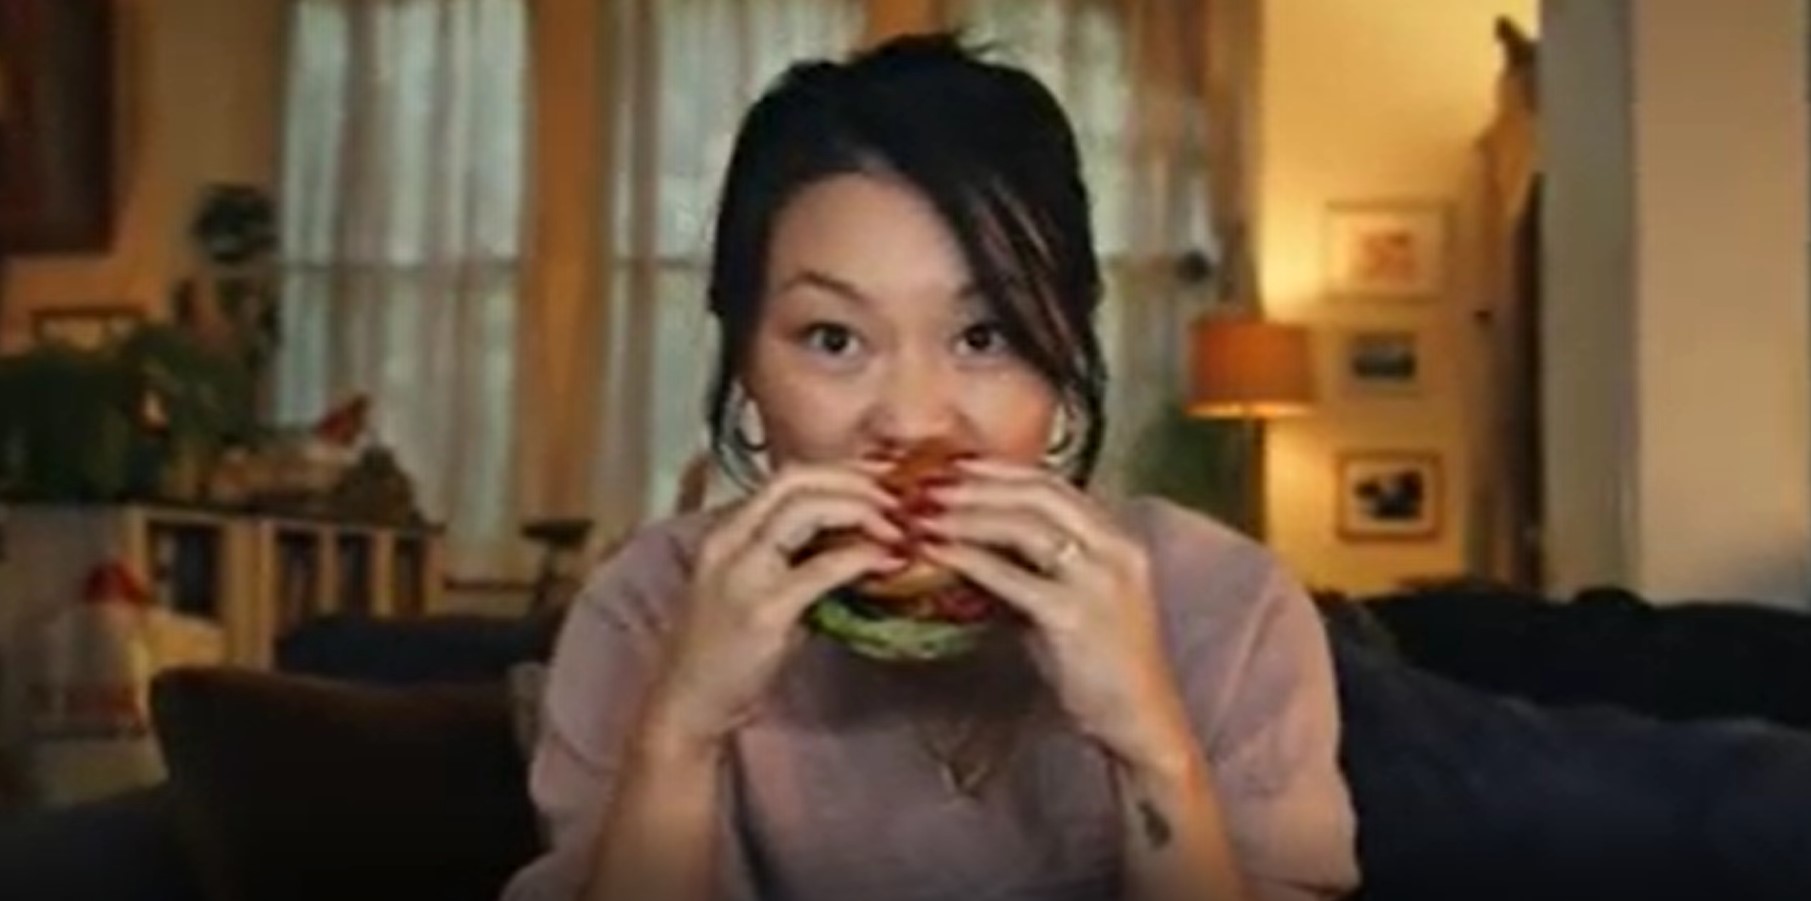 Woman takes bite out of plant burger in Tesco advert